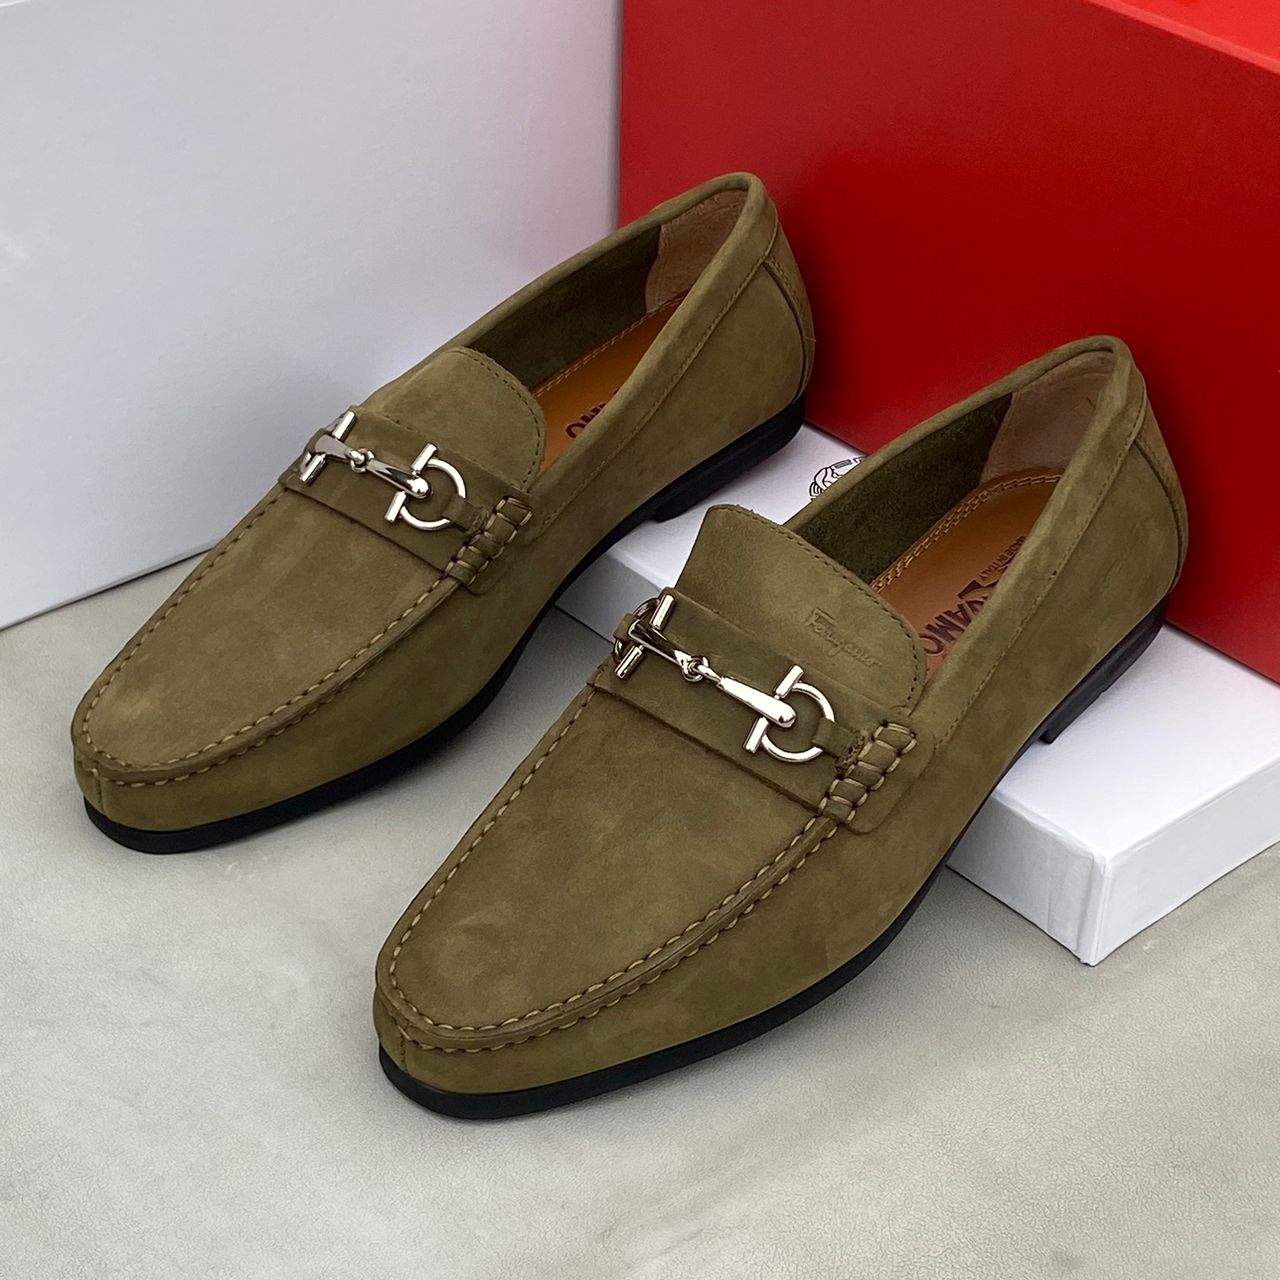 Salvatore Ferragamo Classic Olive Green Suede Leather Loafer Shoe | Buy ...